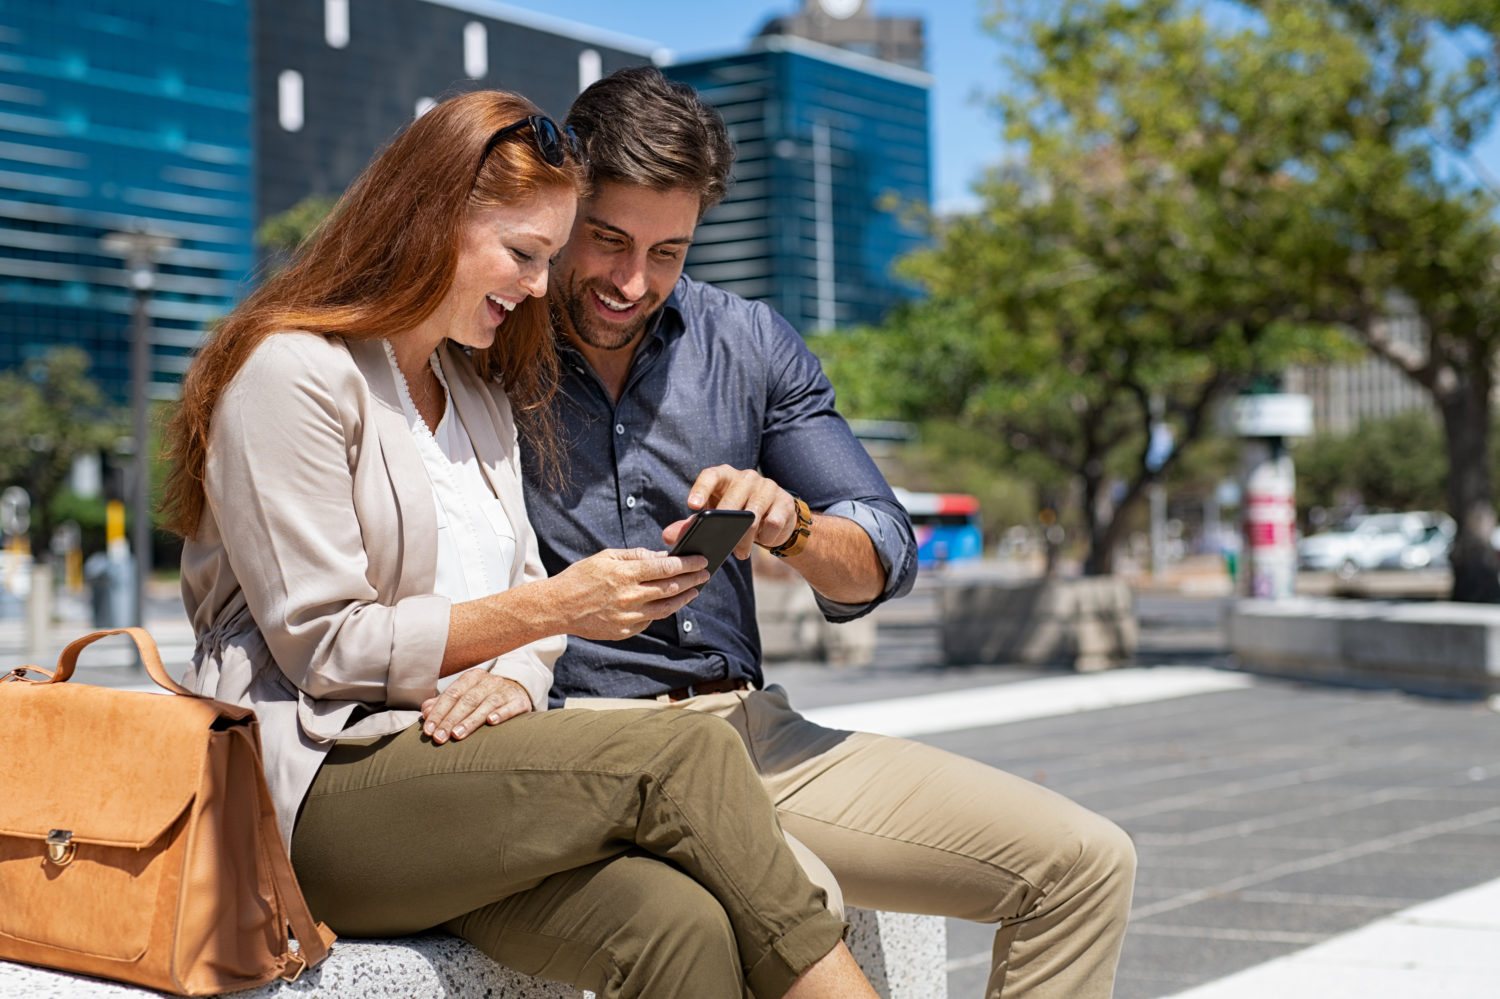 Red-haired woman and man looking excitedly at a phone